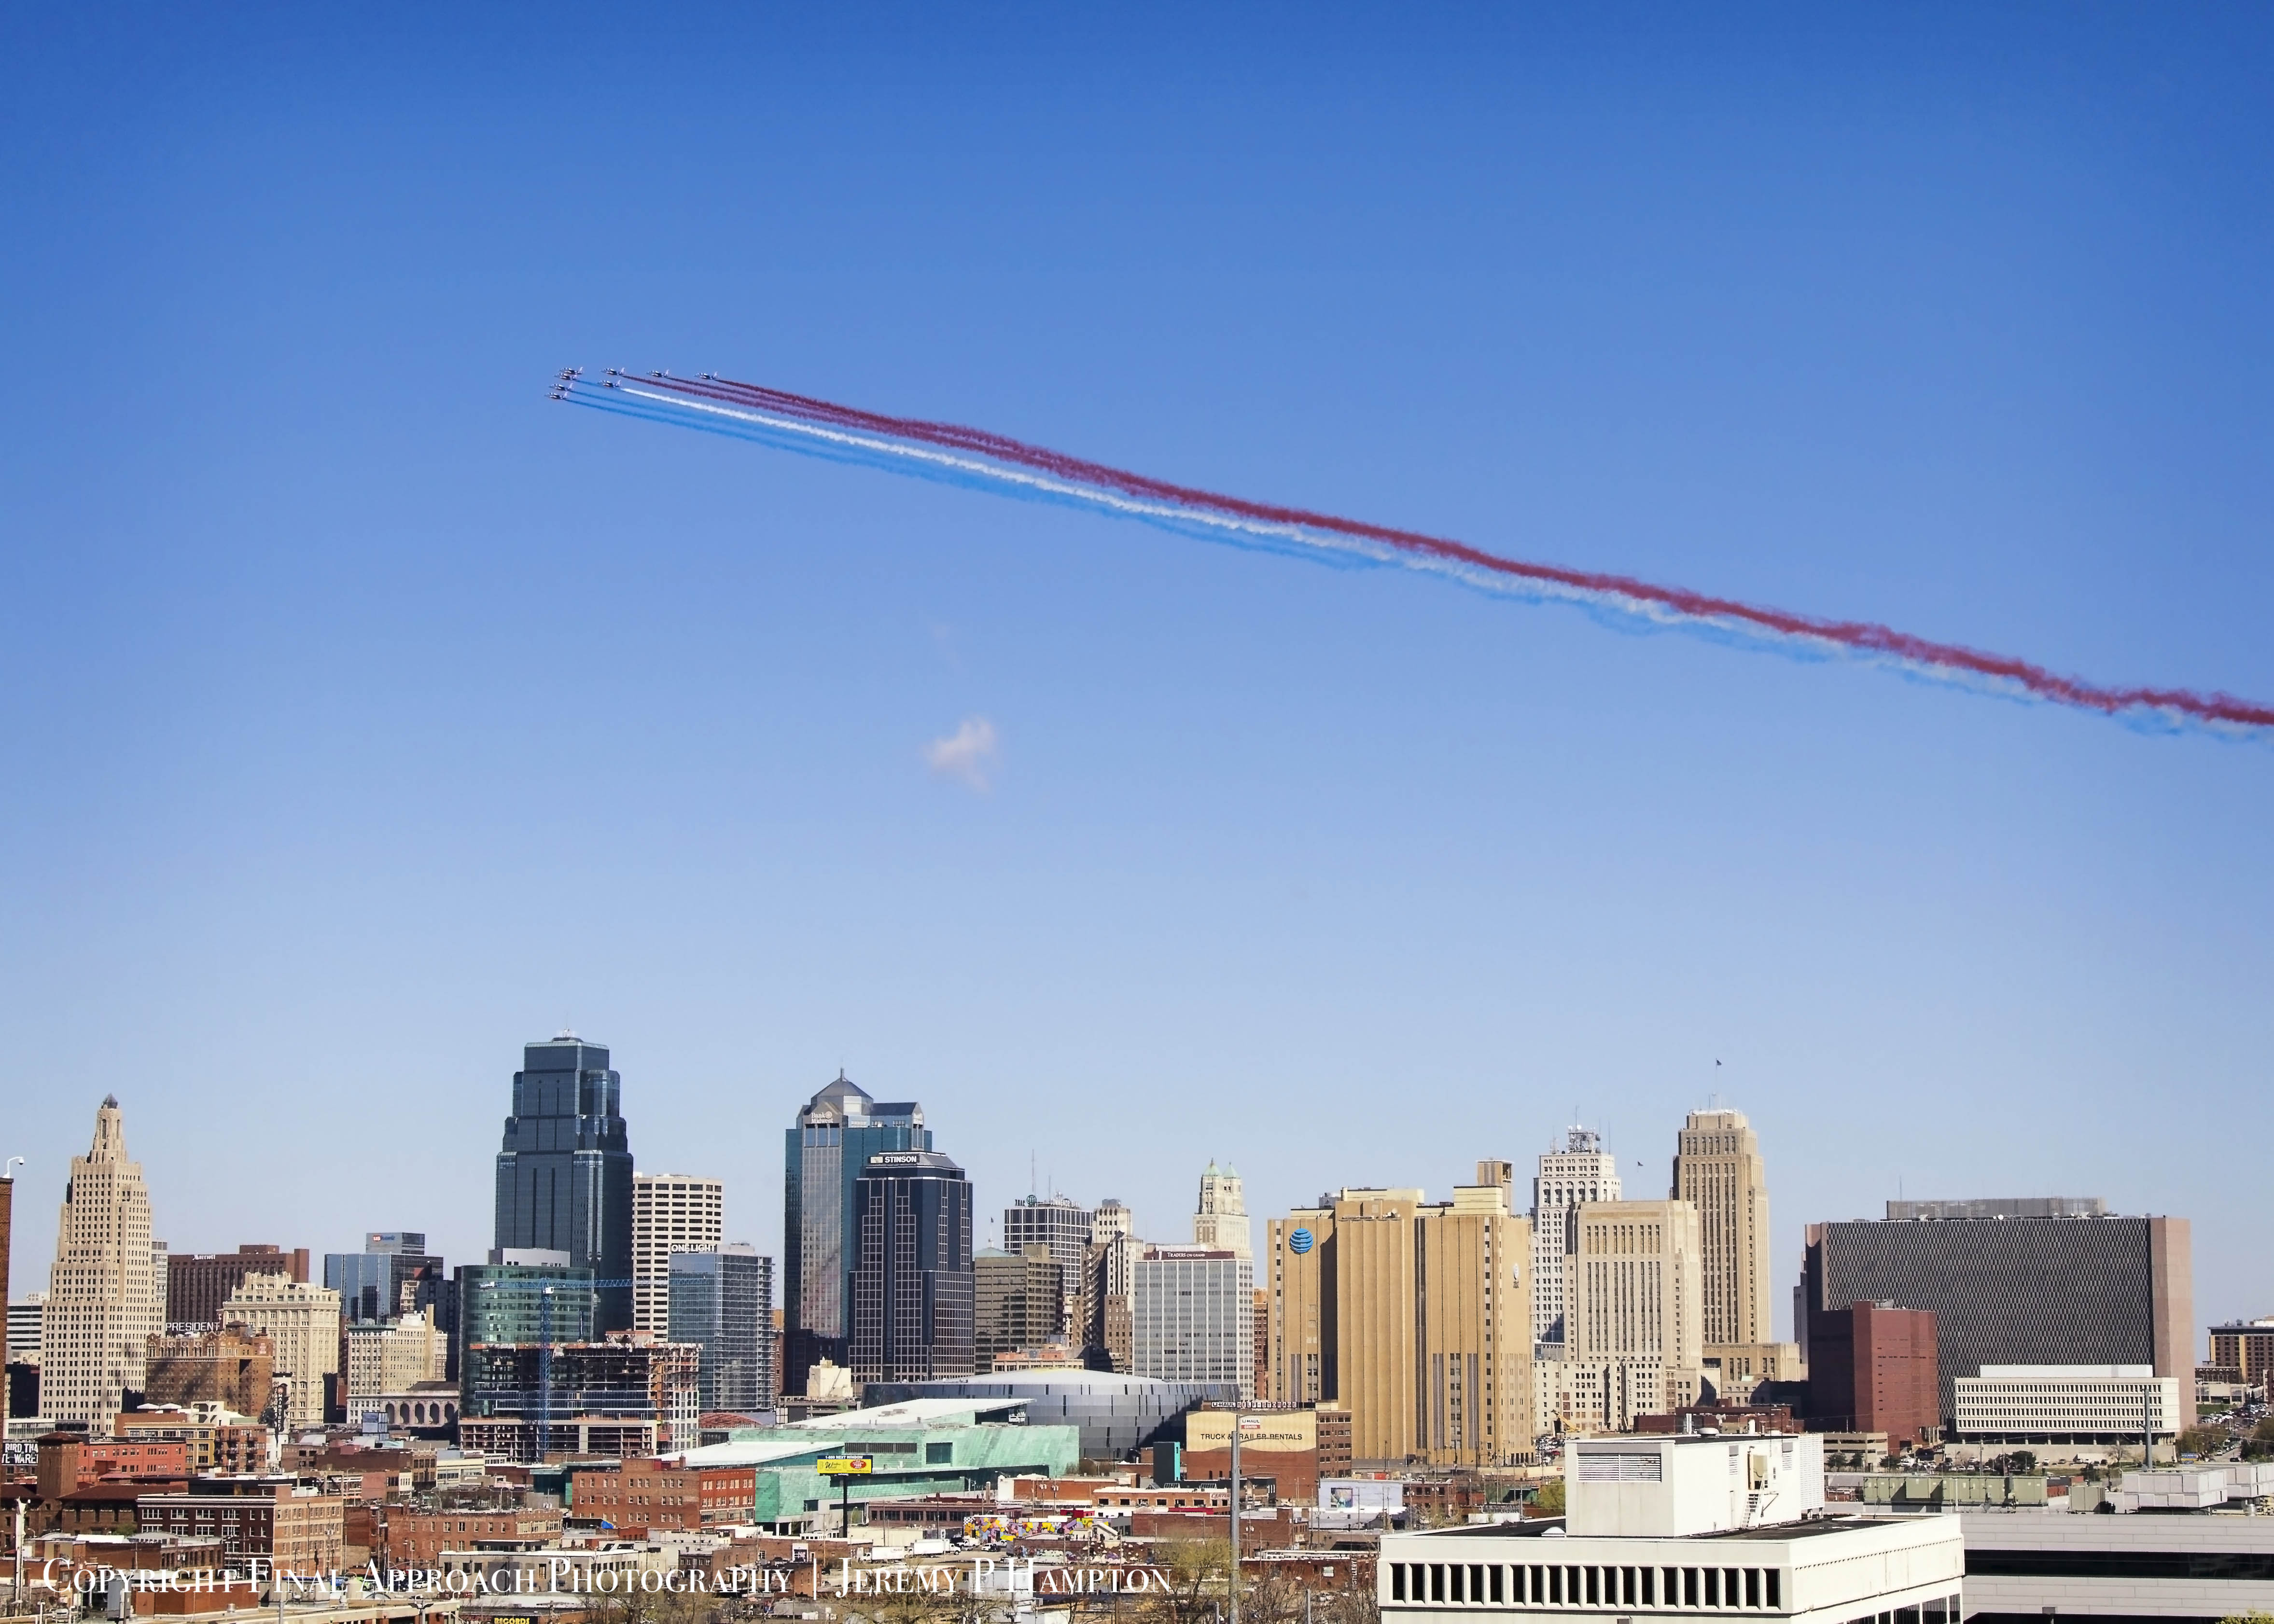 North-South flight over downtown KC